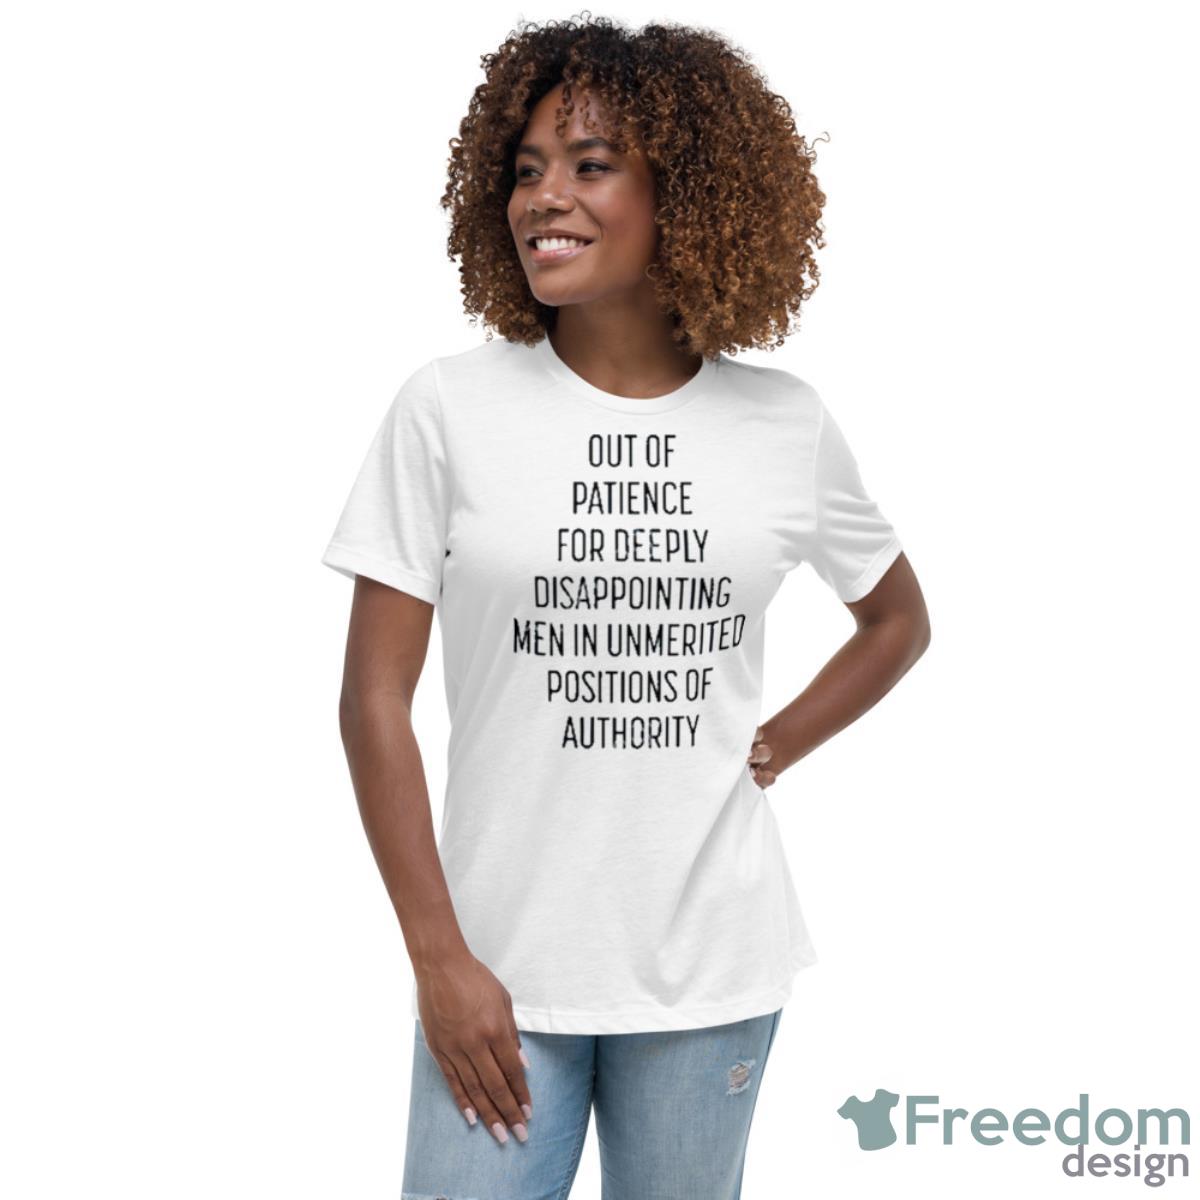 Kate Kelly Out Of Patience For Deeply Disappointing Men In Unmerited Positions Of Authority Shirt